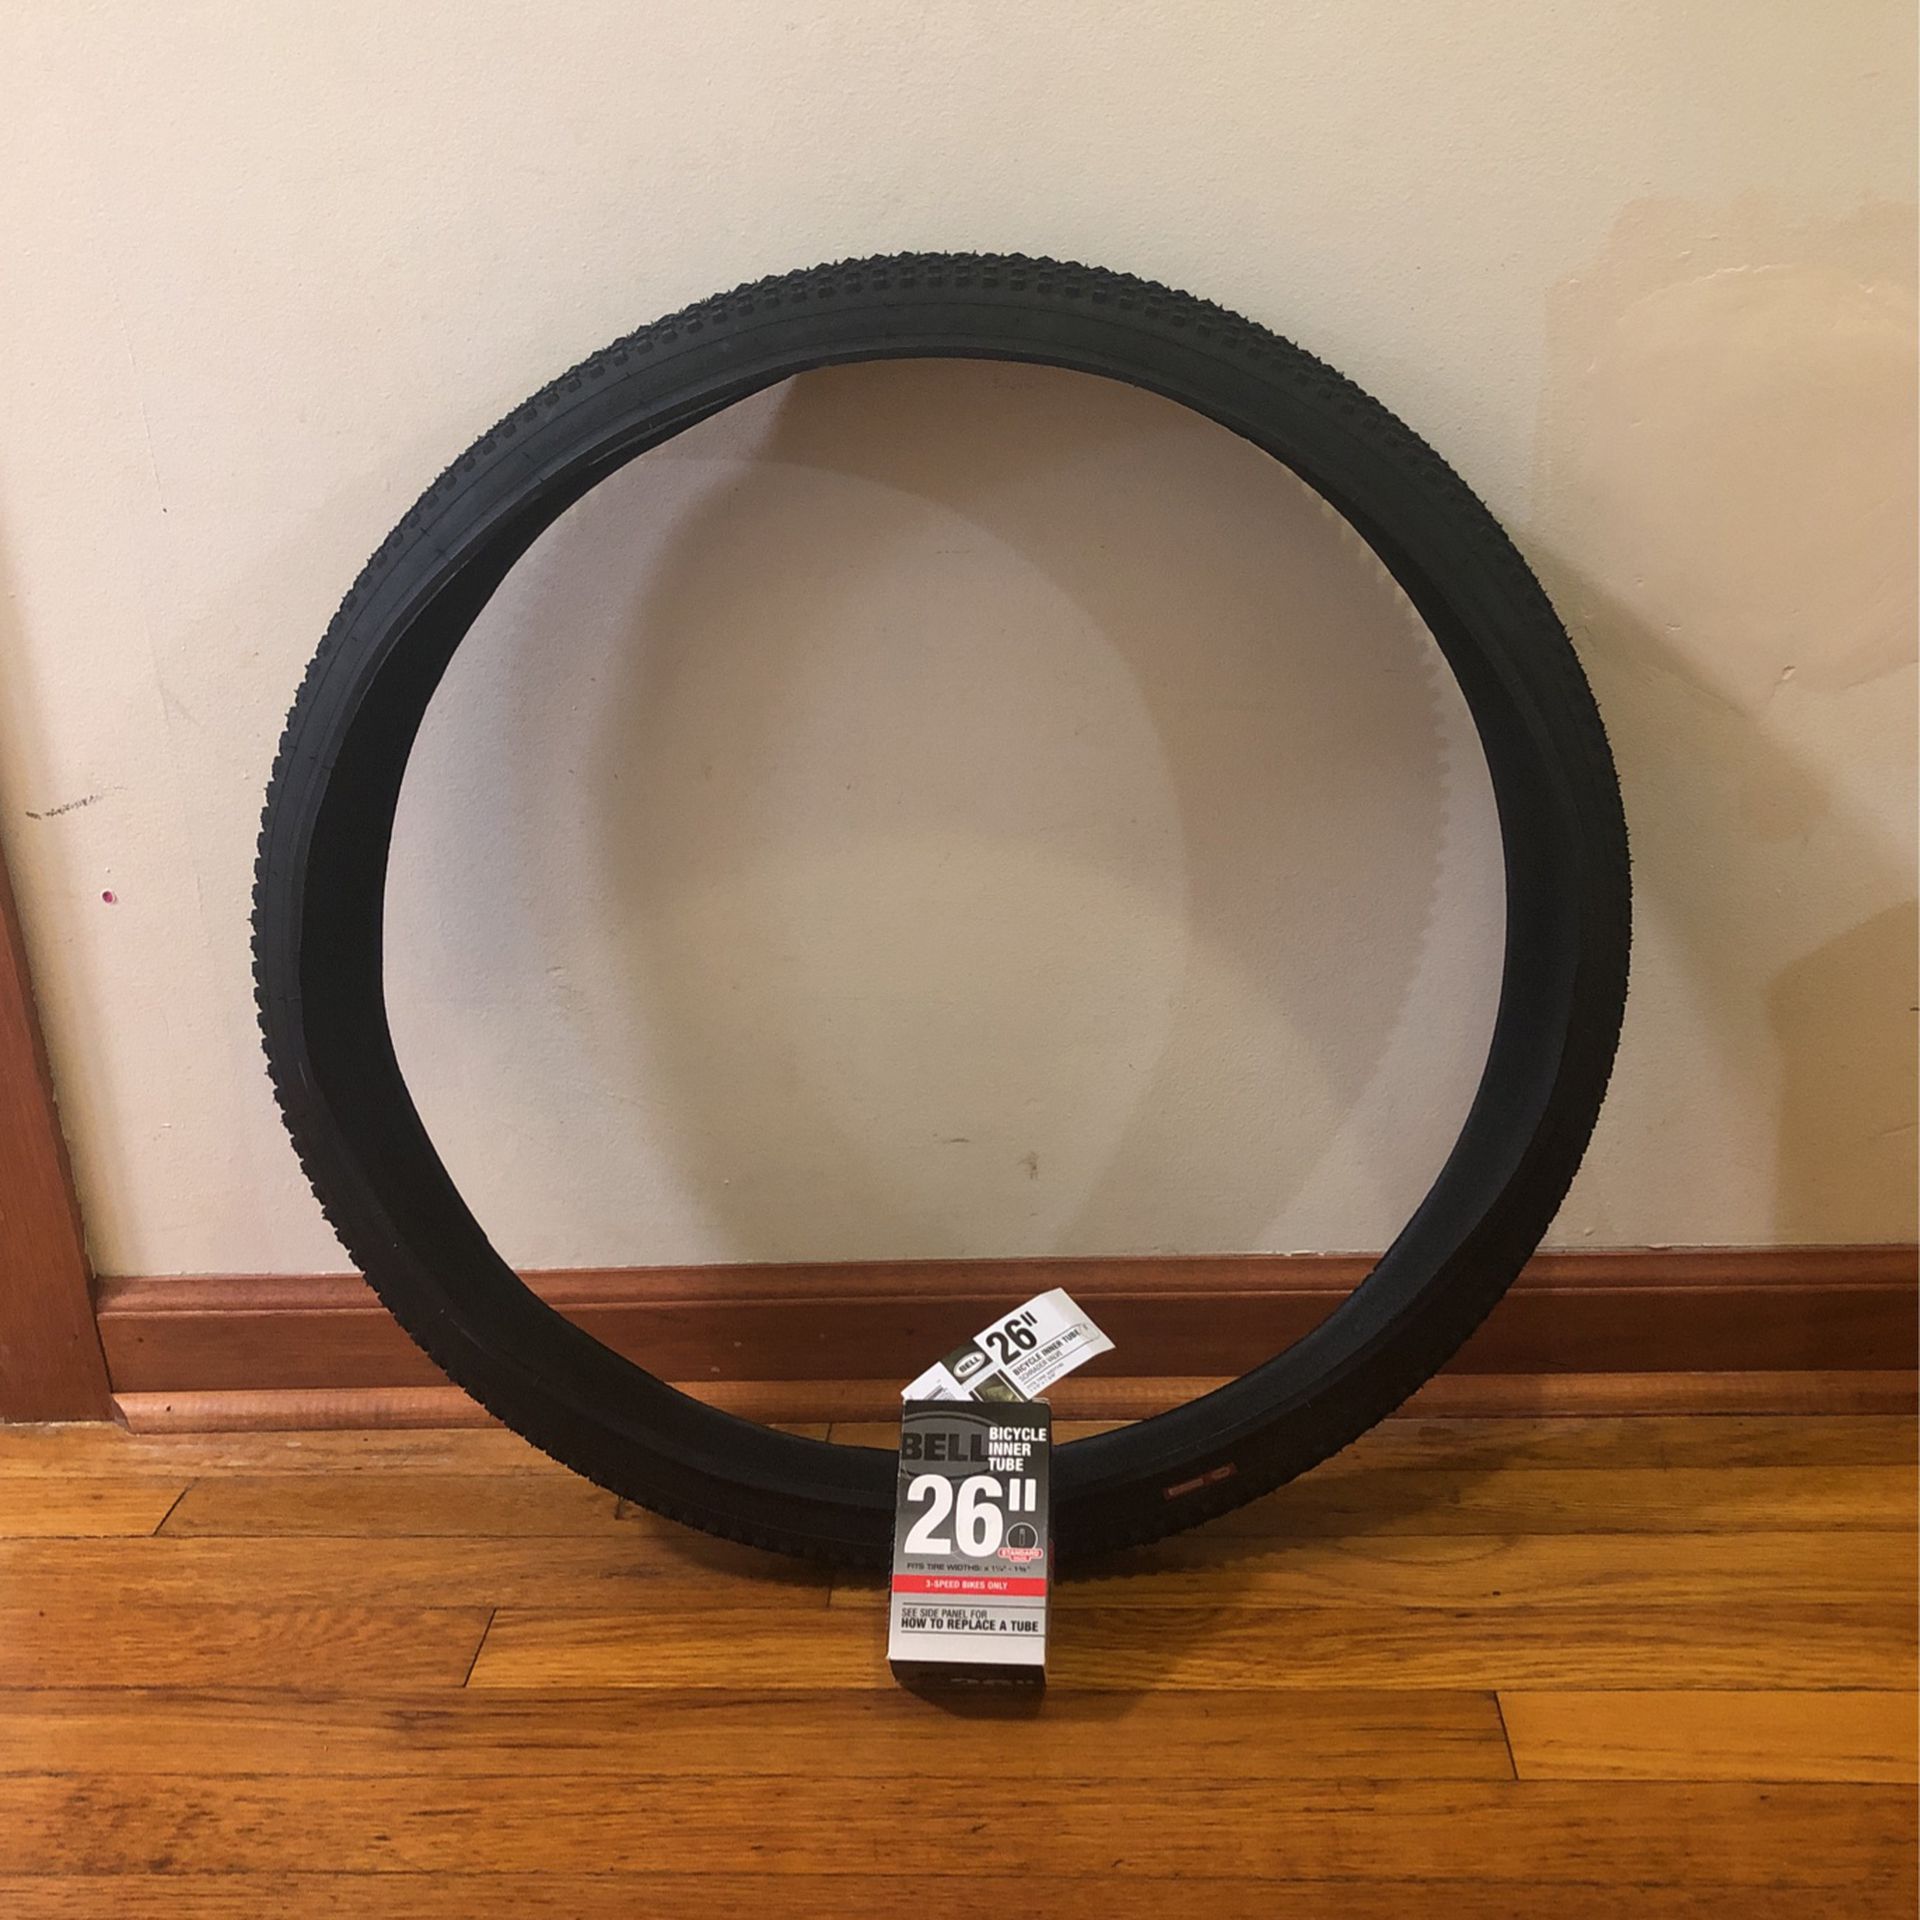 Bicycle Tire And Inner Tube 26”